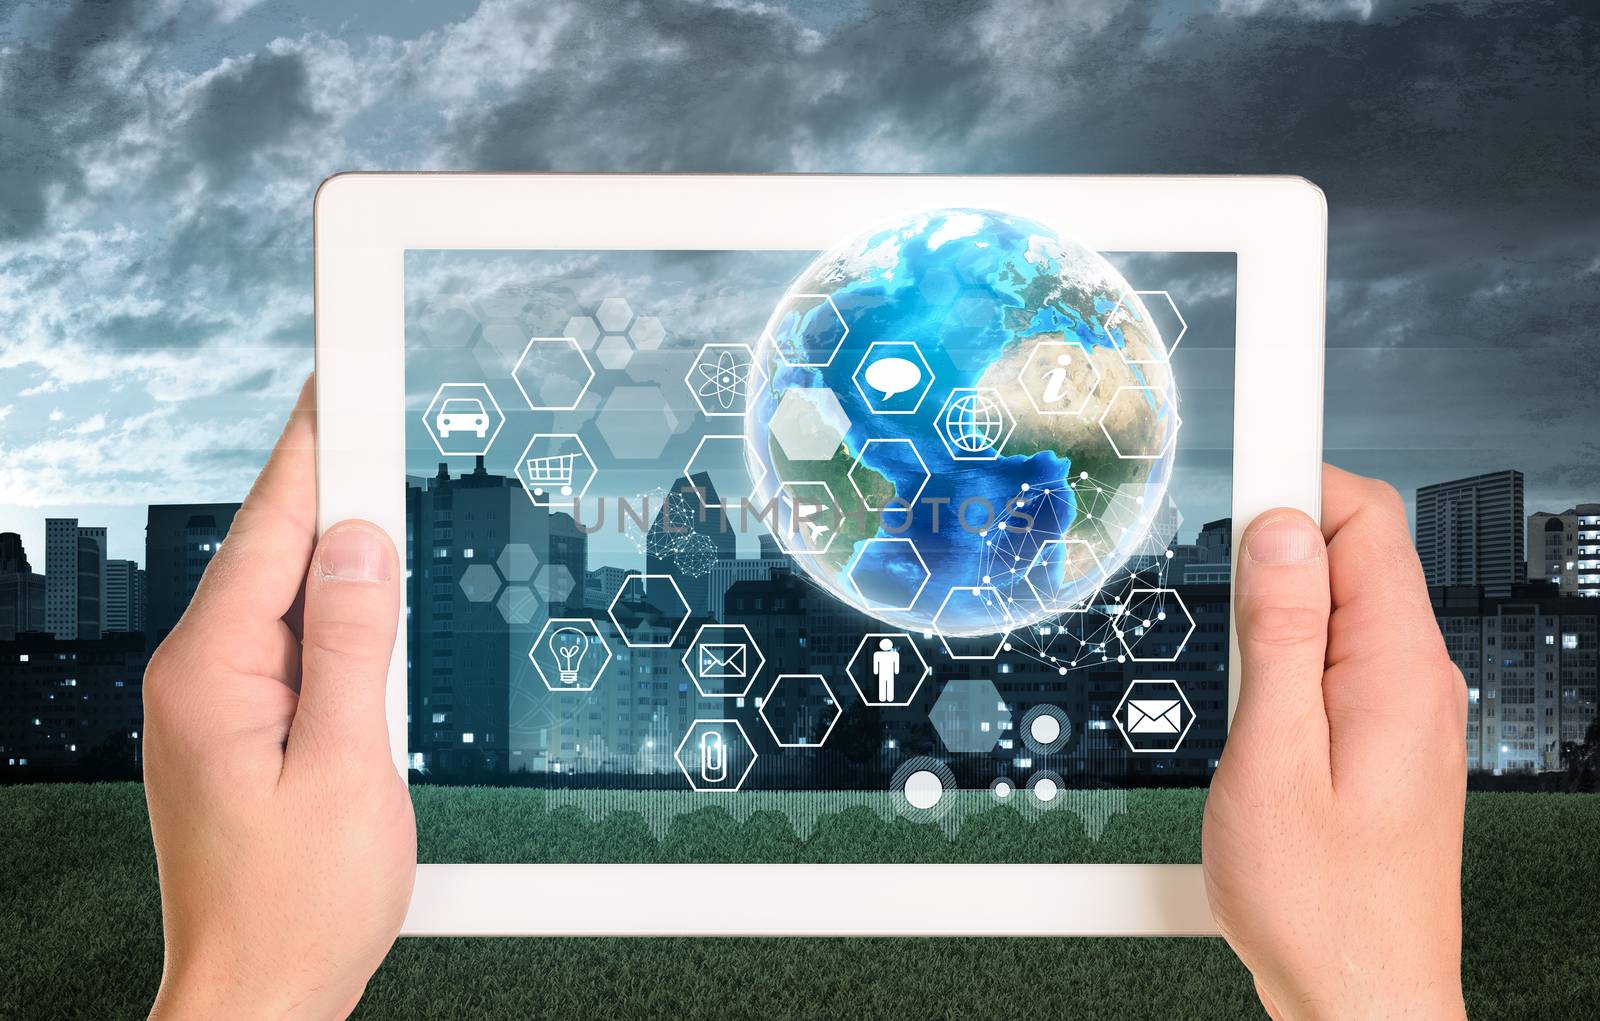 Man hands using tablet pc. Earth and hexagons with icons on touch screen. Element of this image furnished by NASA